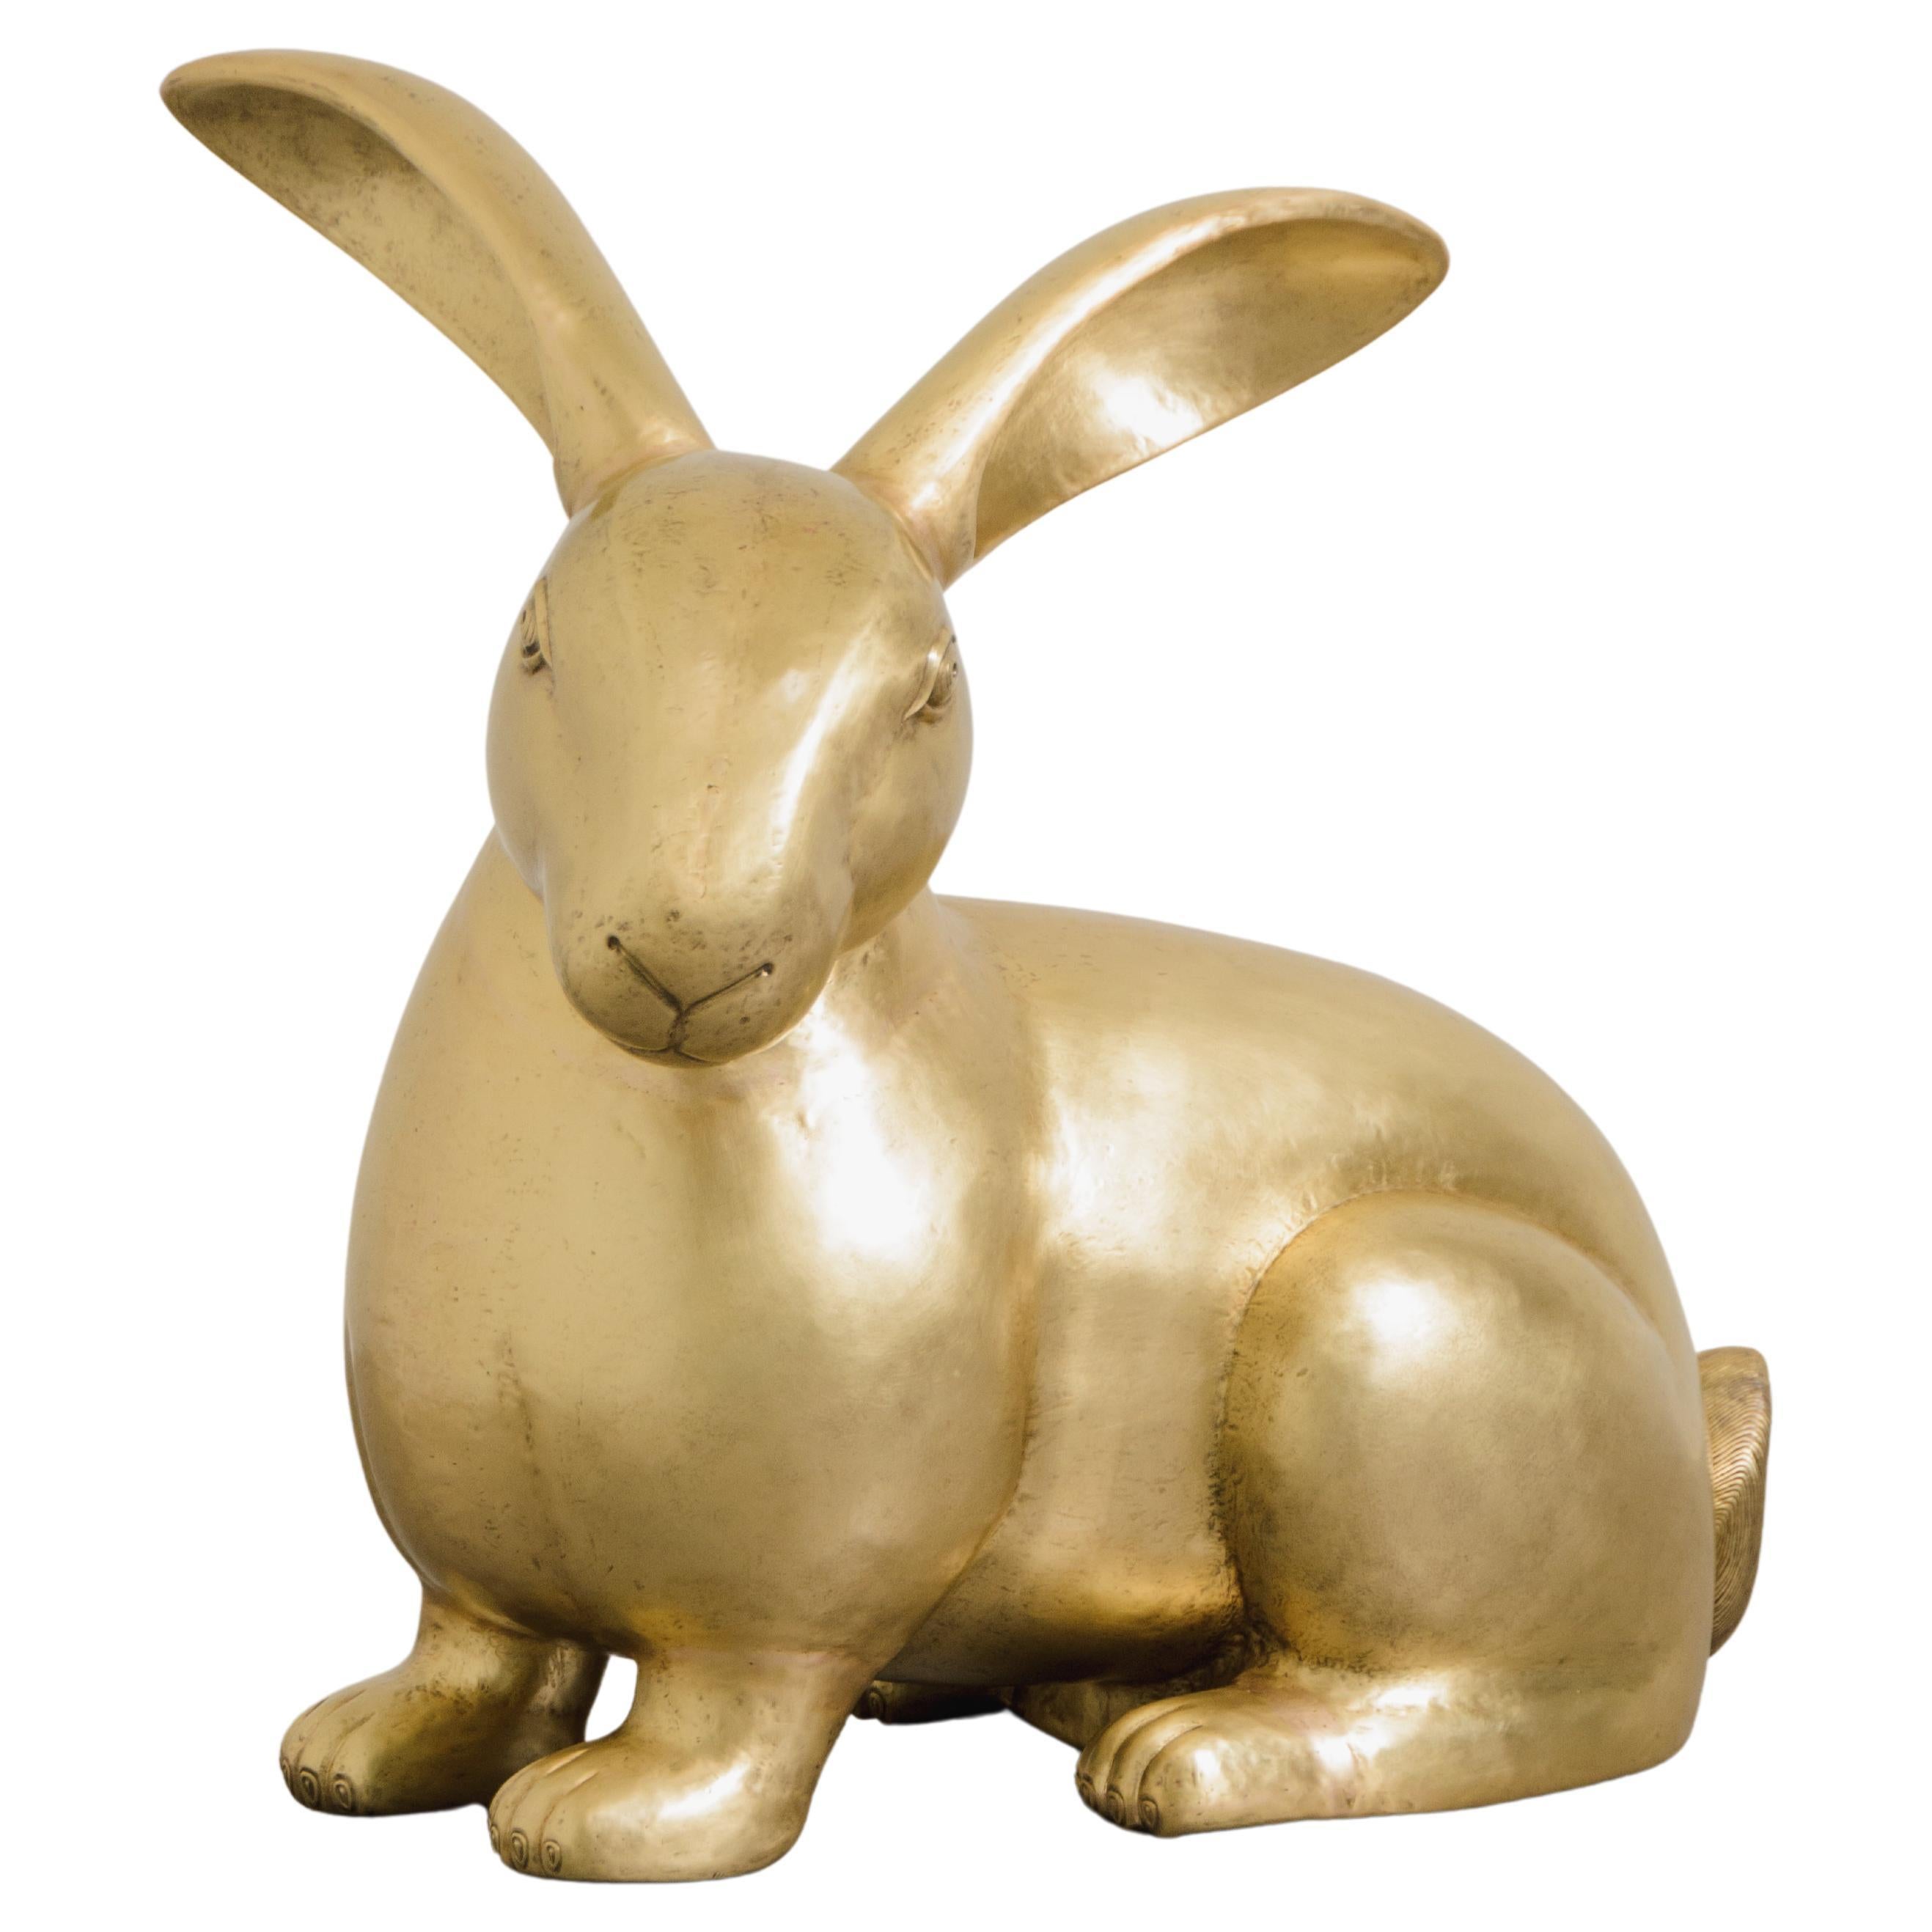 Contemporary Rabbit Sculpture in Brass by Robert Kuo, Hand Repoussé, Limited For Sale